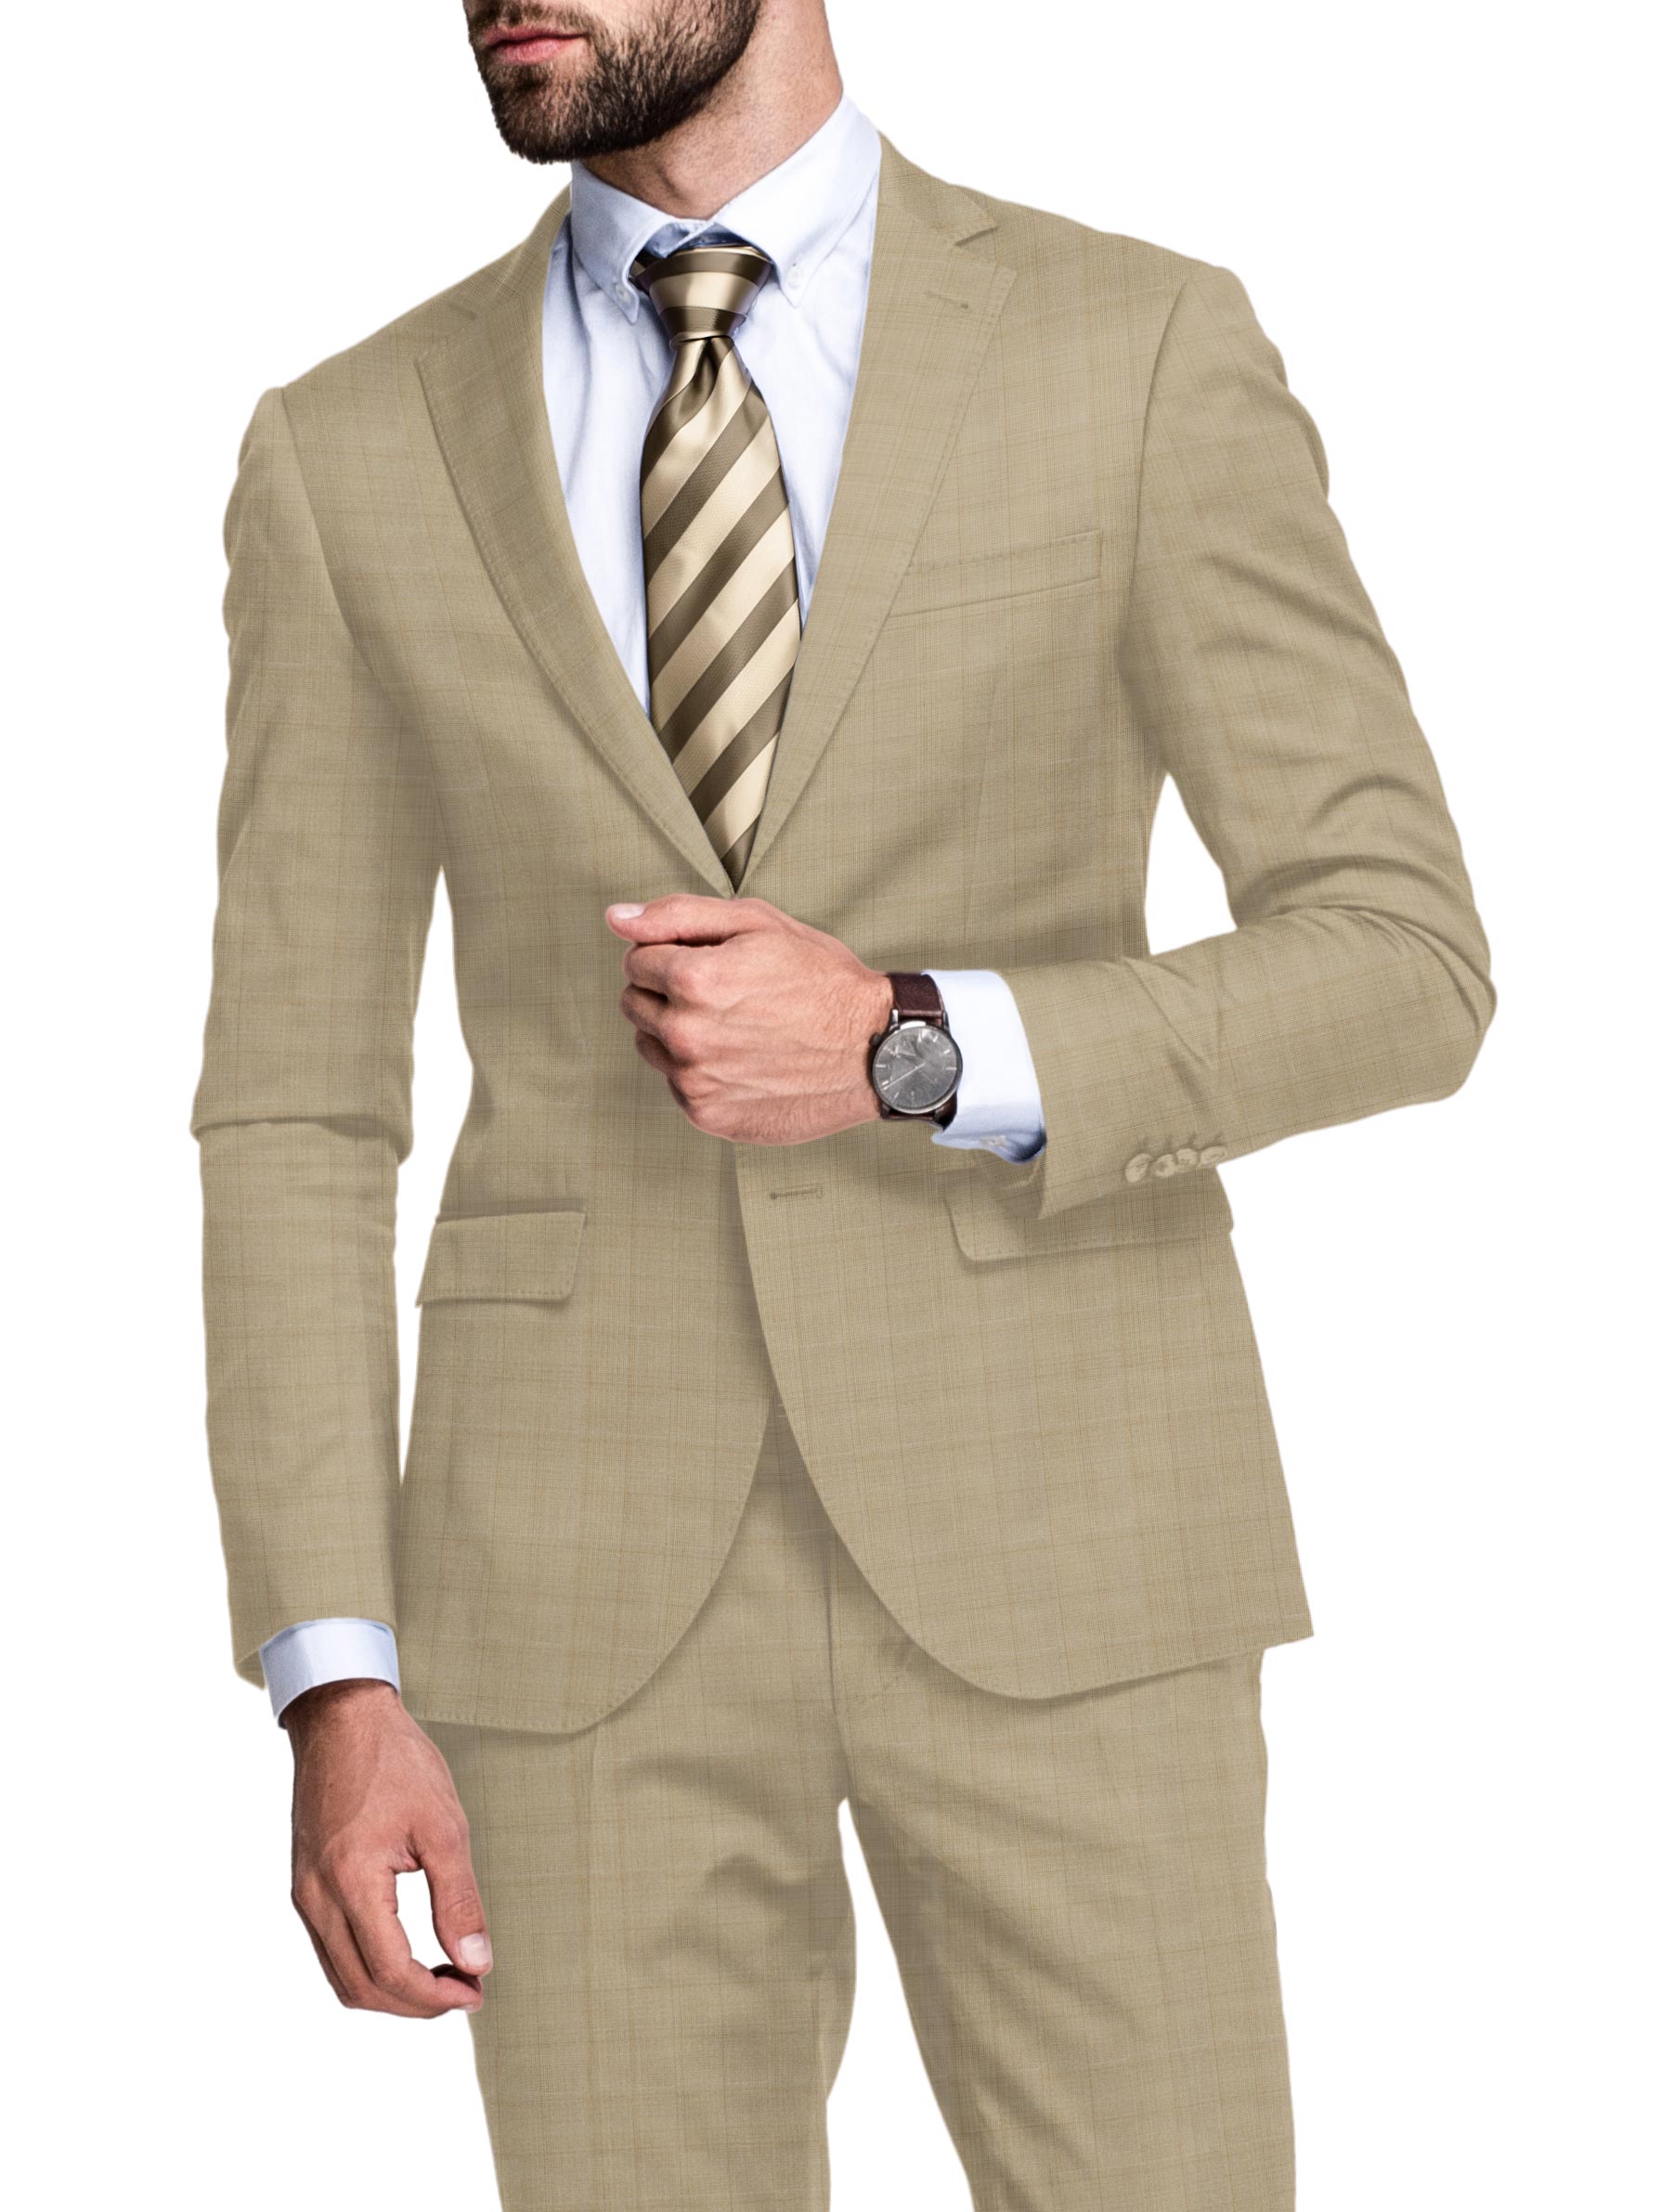 Camel Polyester/Lycra Herringbone Stretch Suiting - NY Designer - 56W >  Suiting Fabric > Fabric Mart